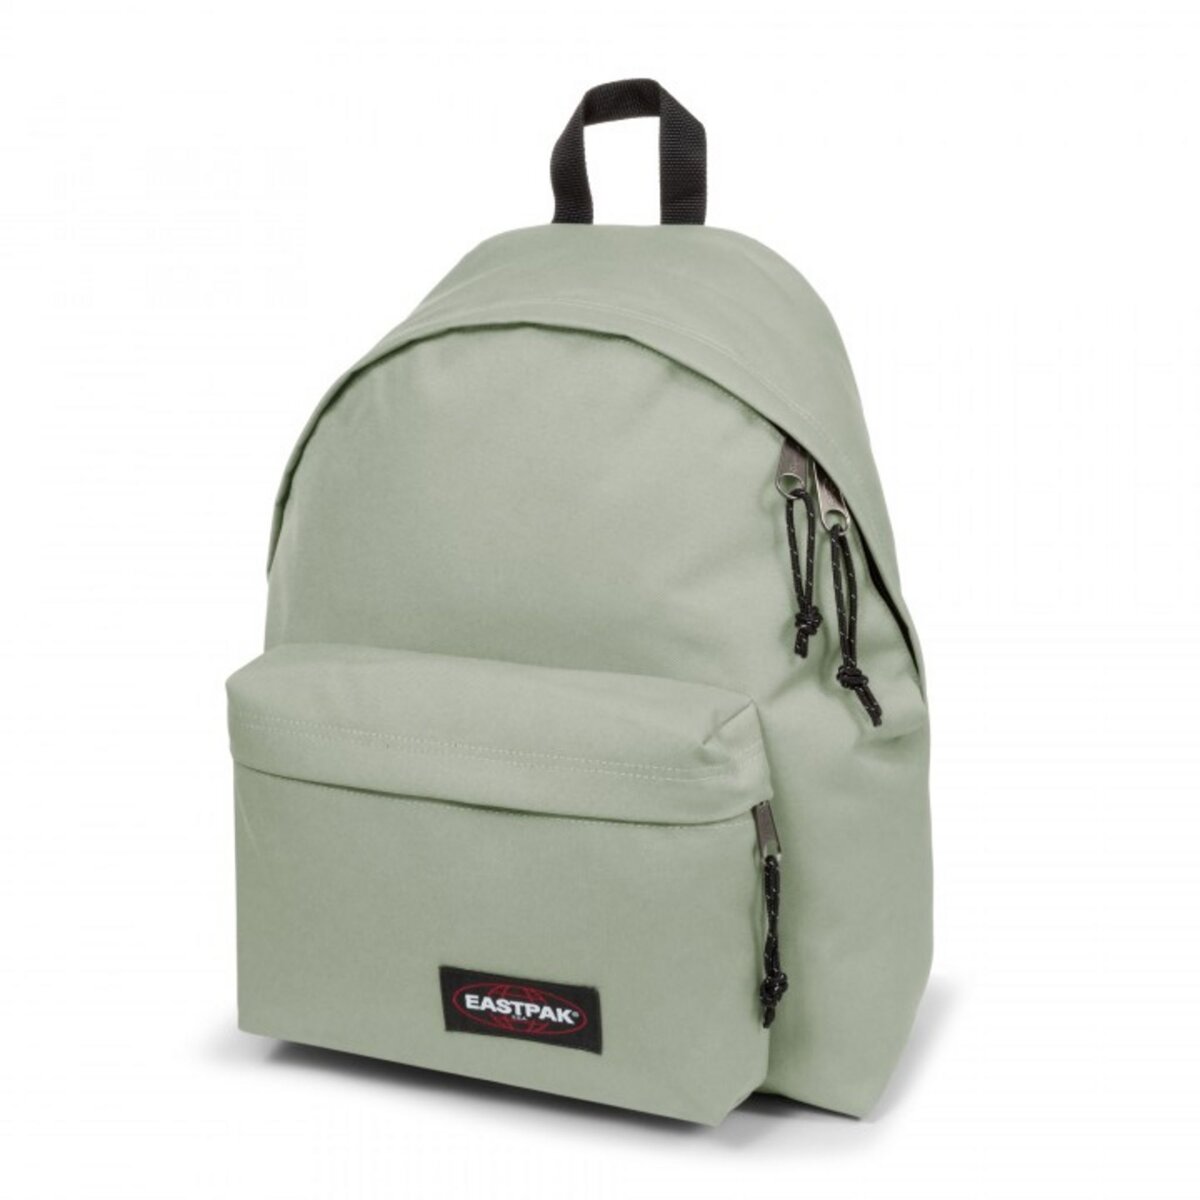 EASTPAK Sac à dos PADDED PAK'R ghost story 1 compartiment